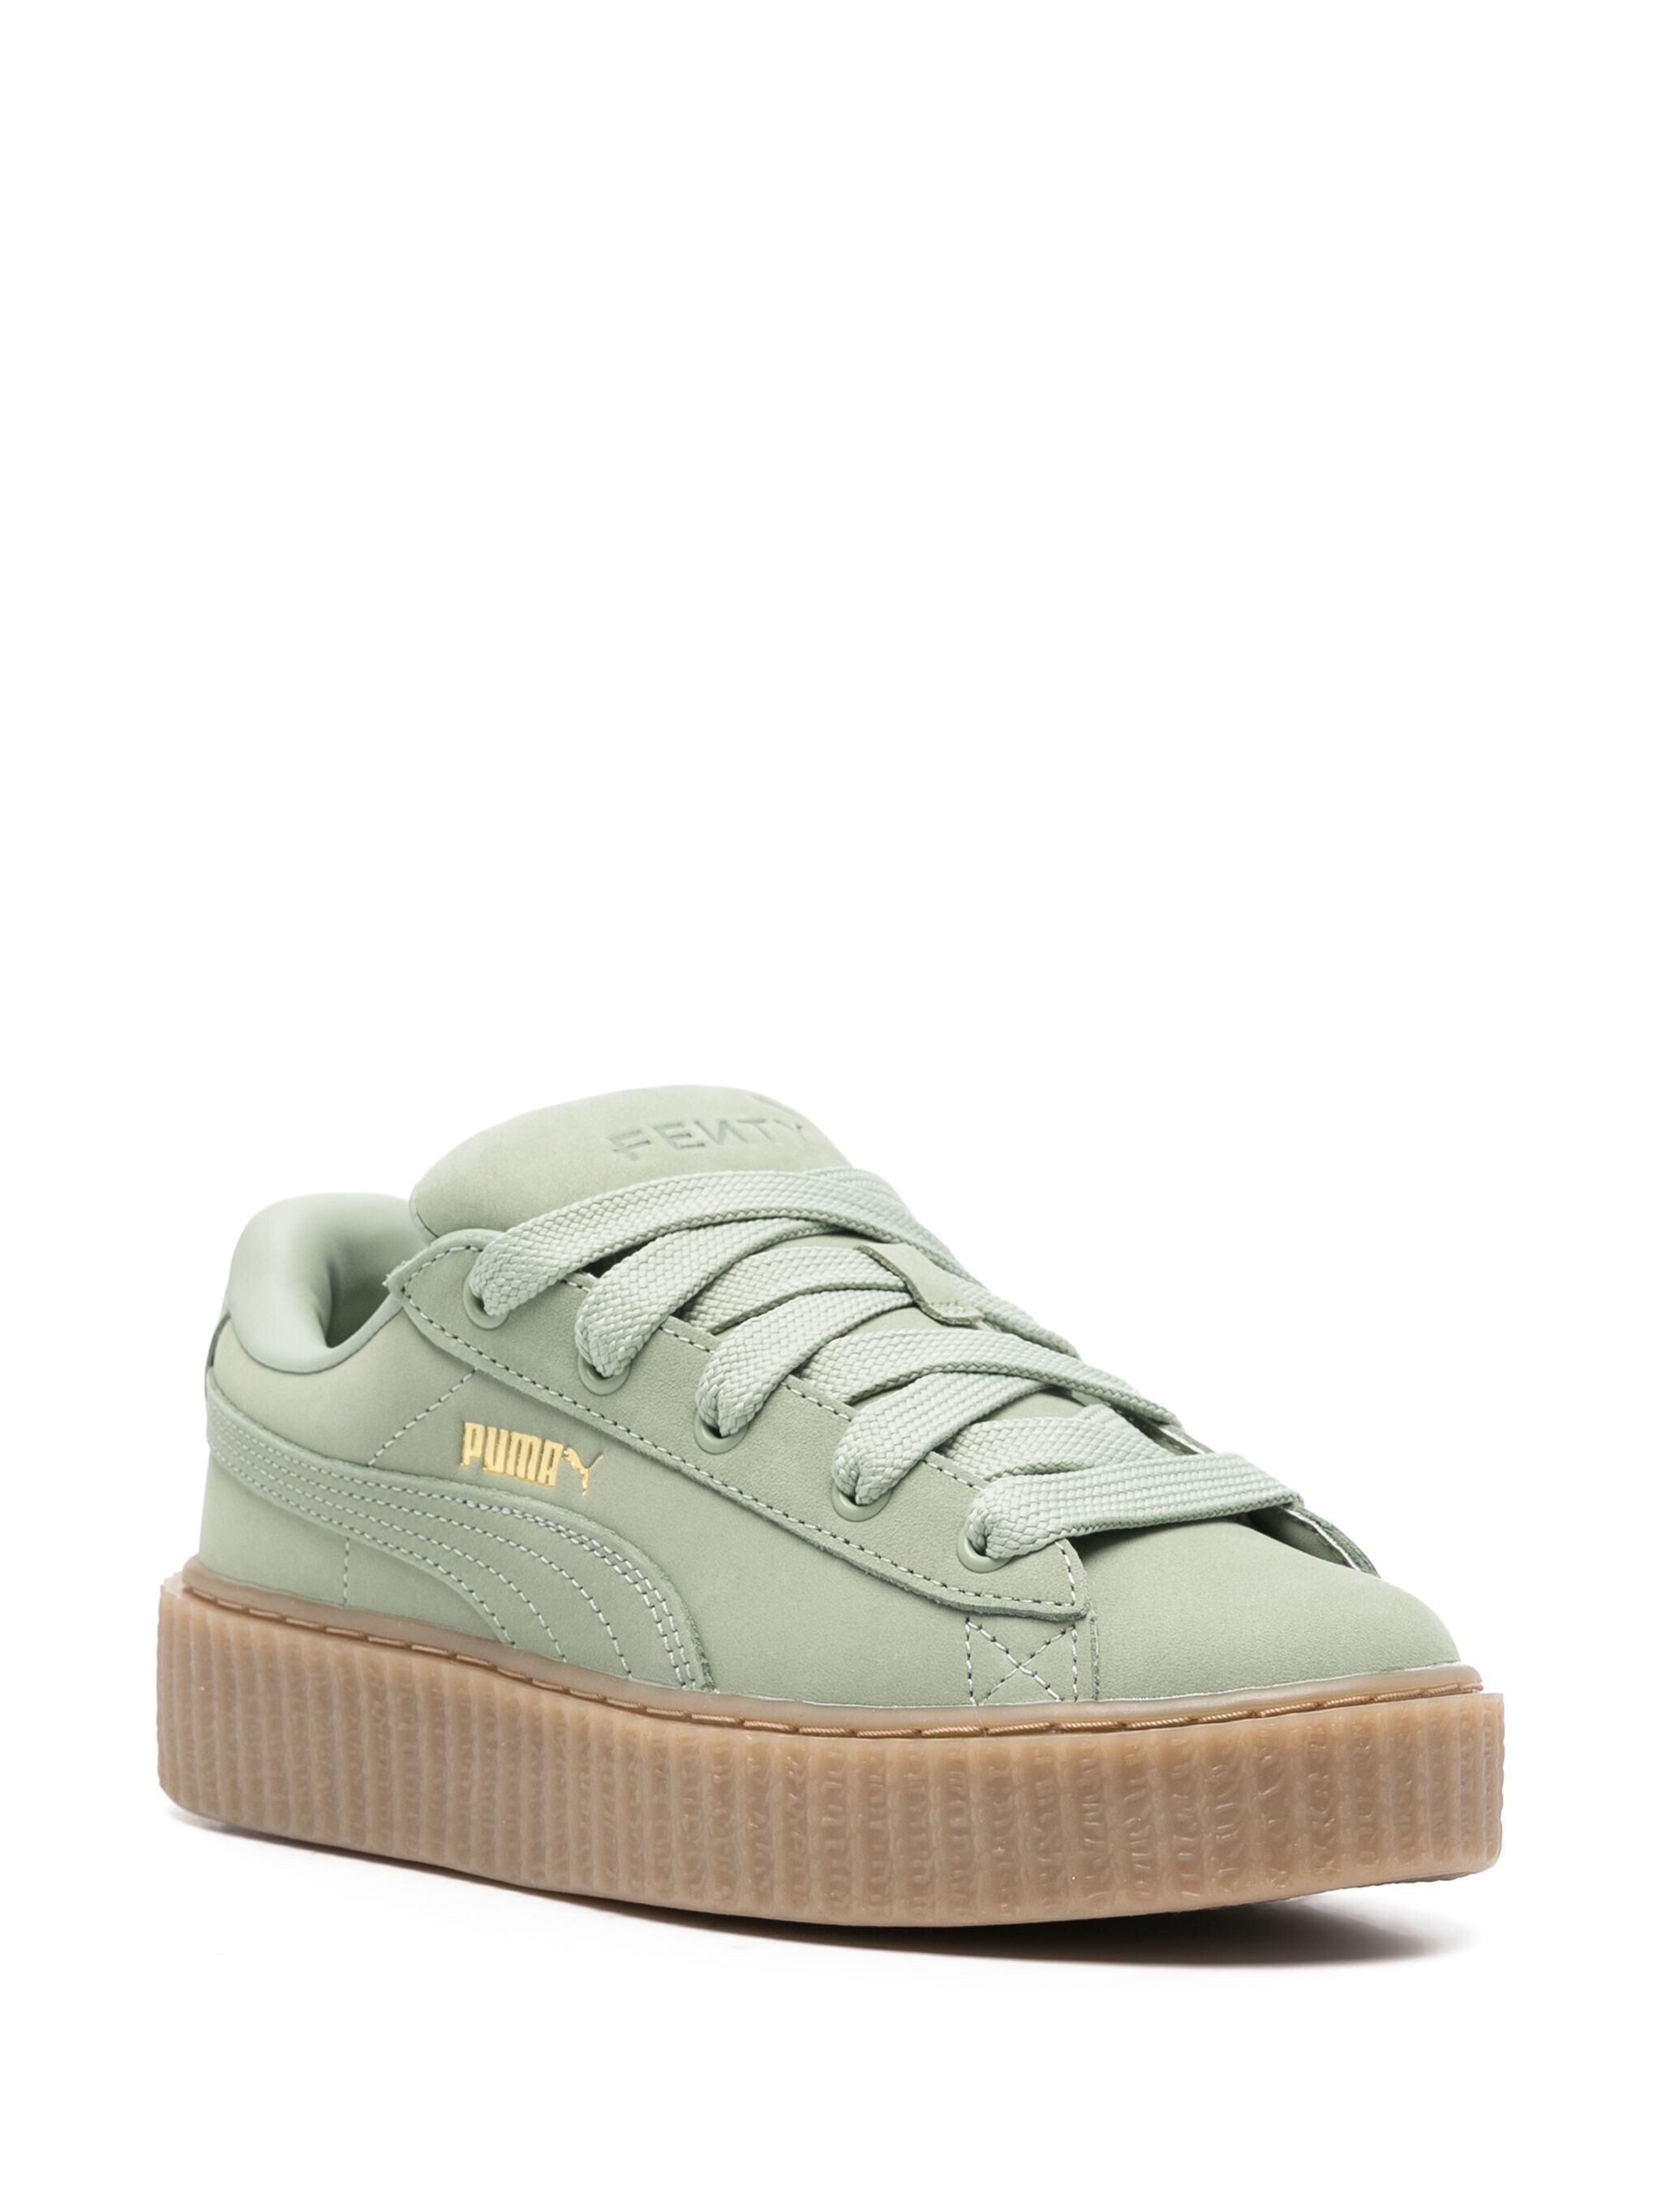 Creeper Phatty leather sneakers - 2